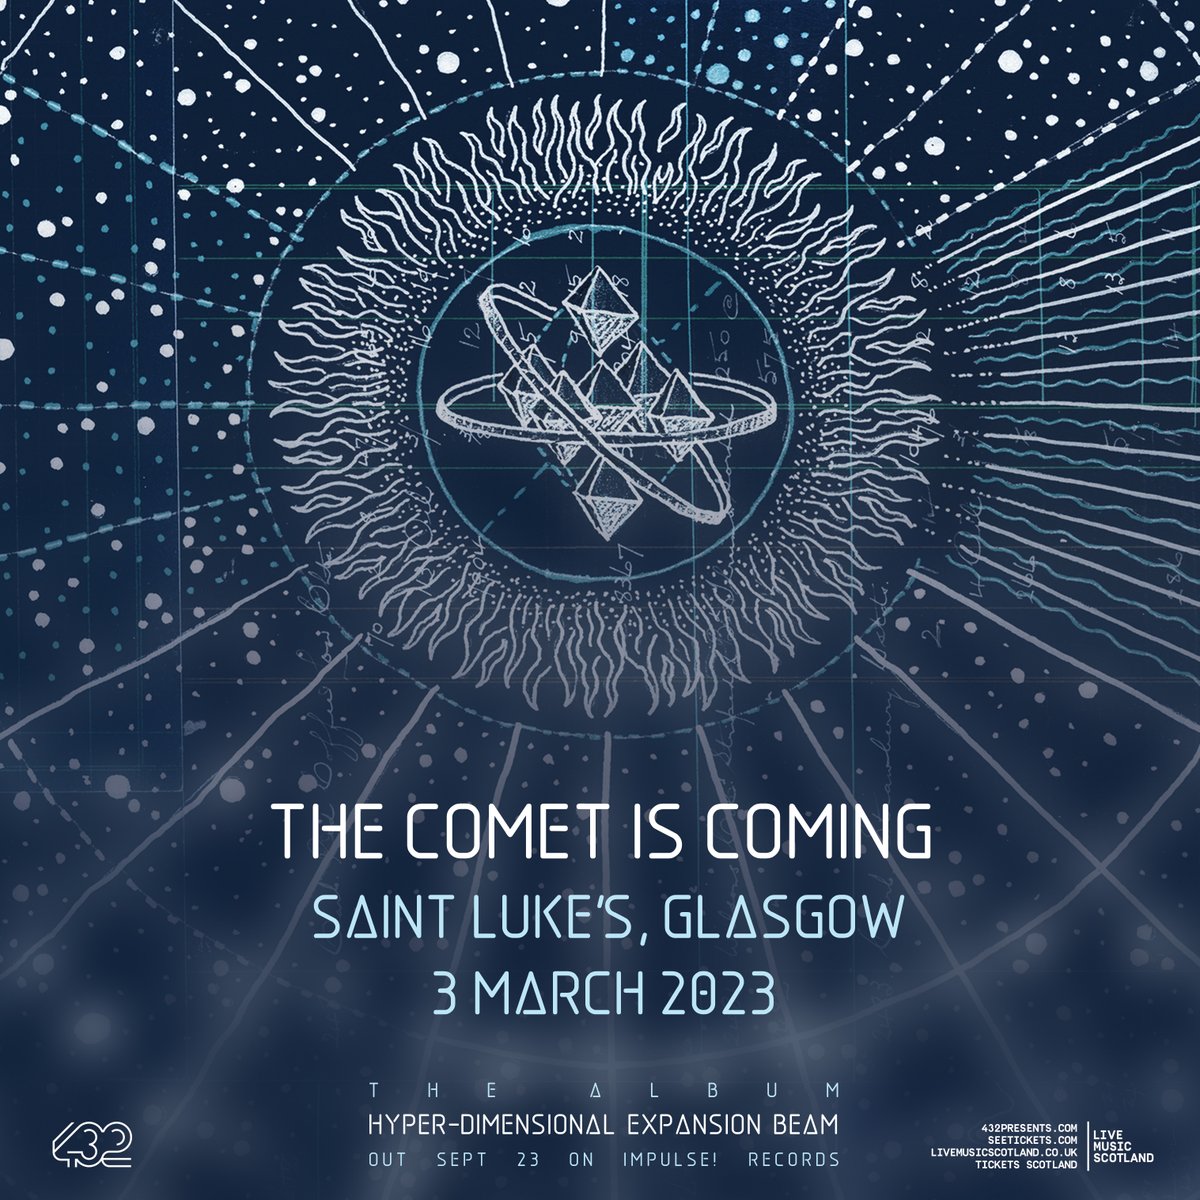 Announced TODAY!! Cosmic jazz overlords @cometcoming are back with new album Hyper-Dimensional Expansion Beam 🛸 They play @stlukesglasgow on Friday 3 March, 2023 - tickets on sale Fri 30 Sep at 10am! 🎟: bit.ly/3DEajUP